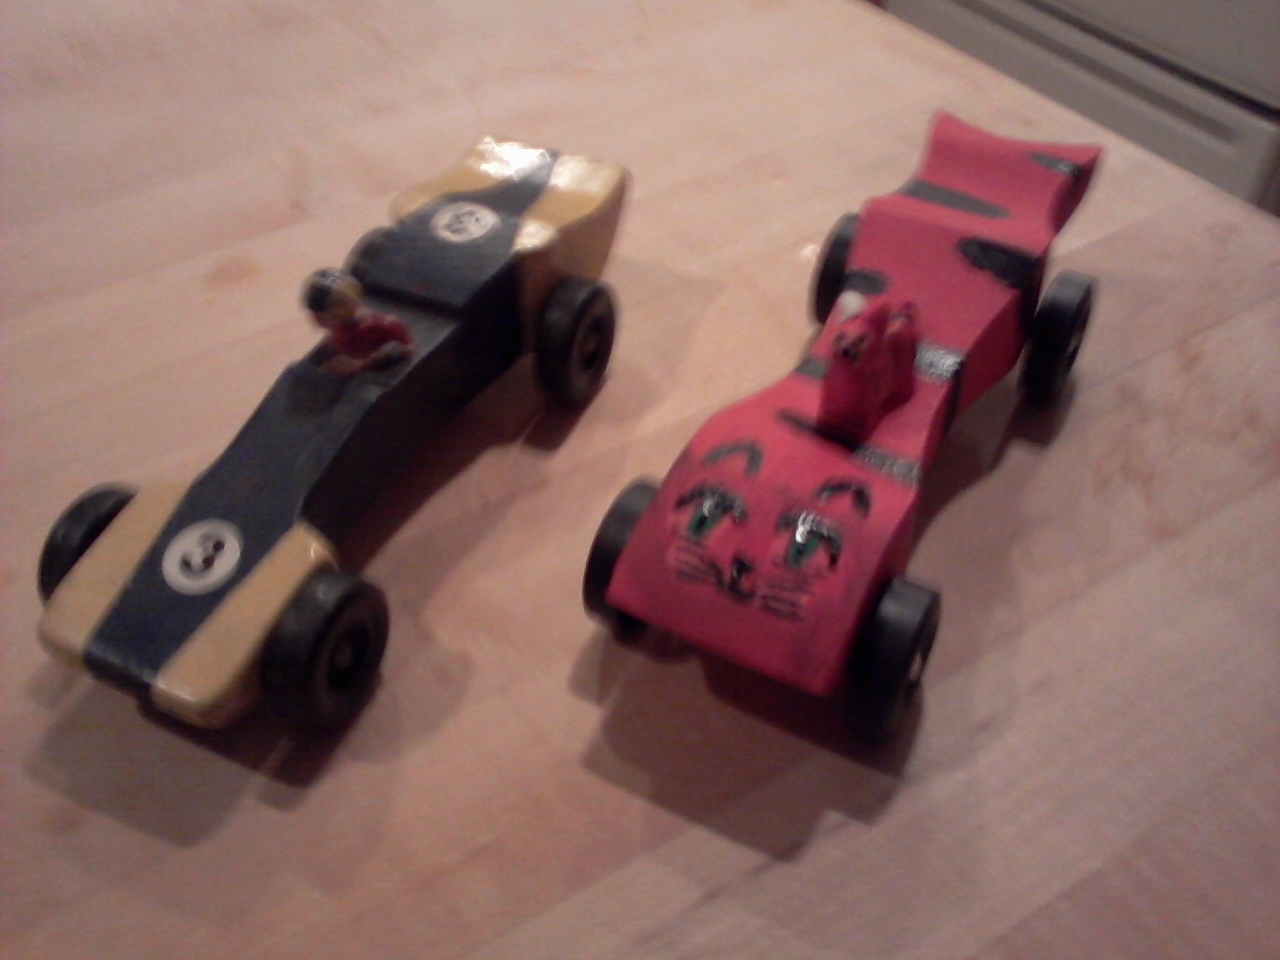 Our cars side by side